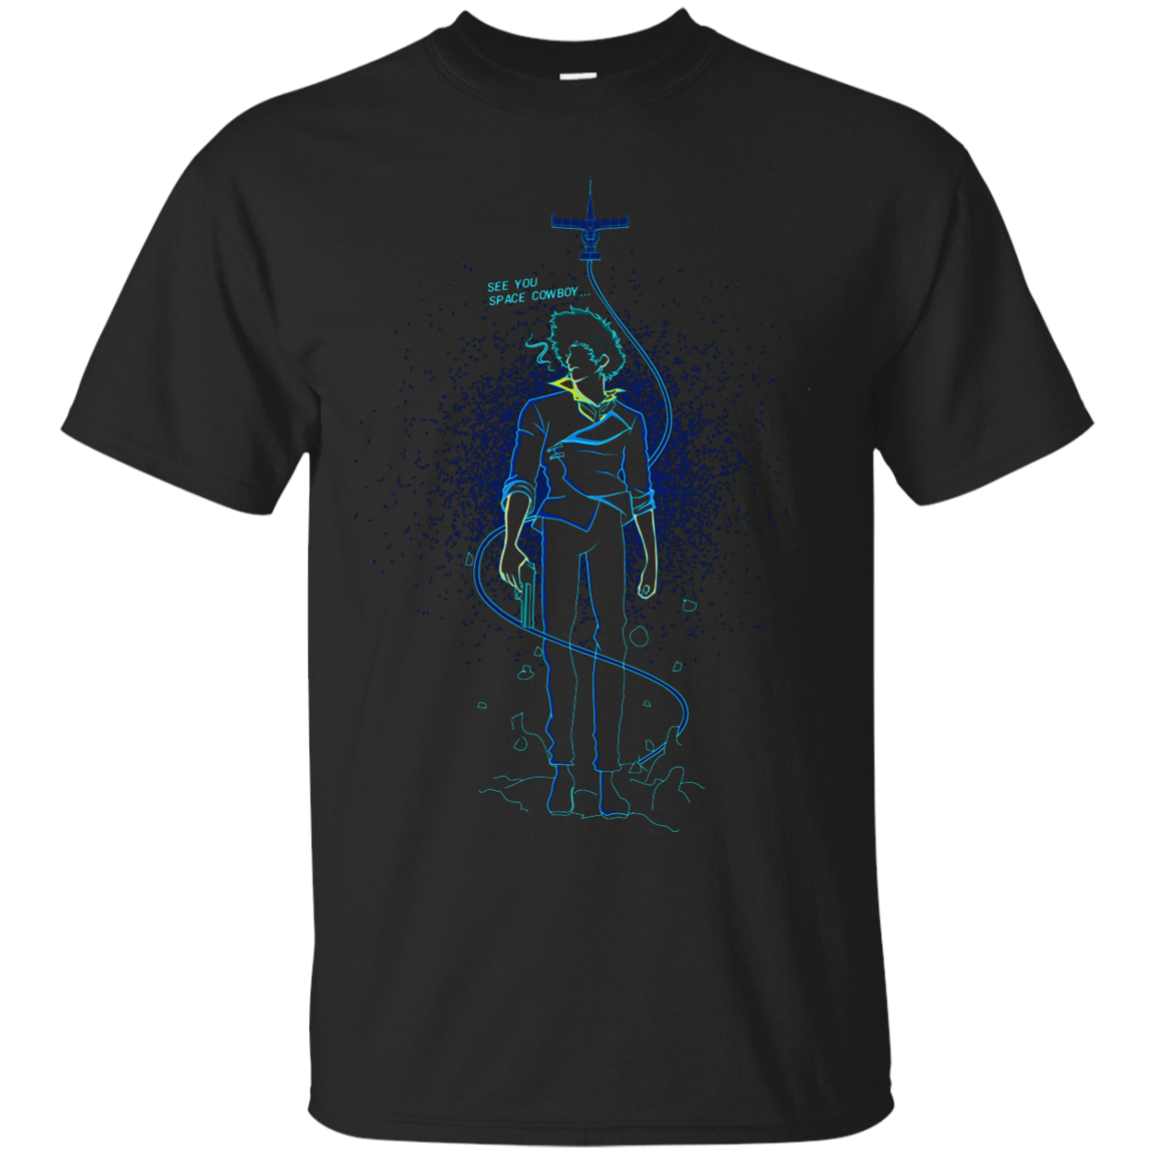 Shadow of Space Cowboy T-Shirt